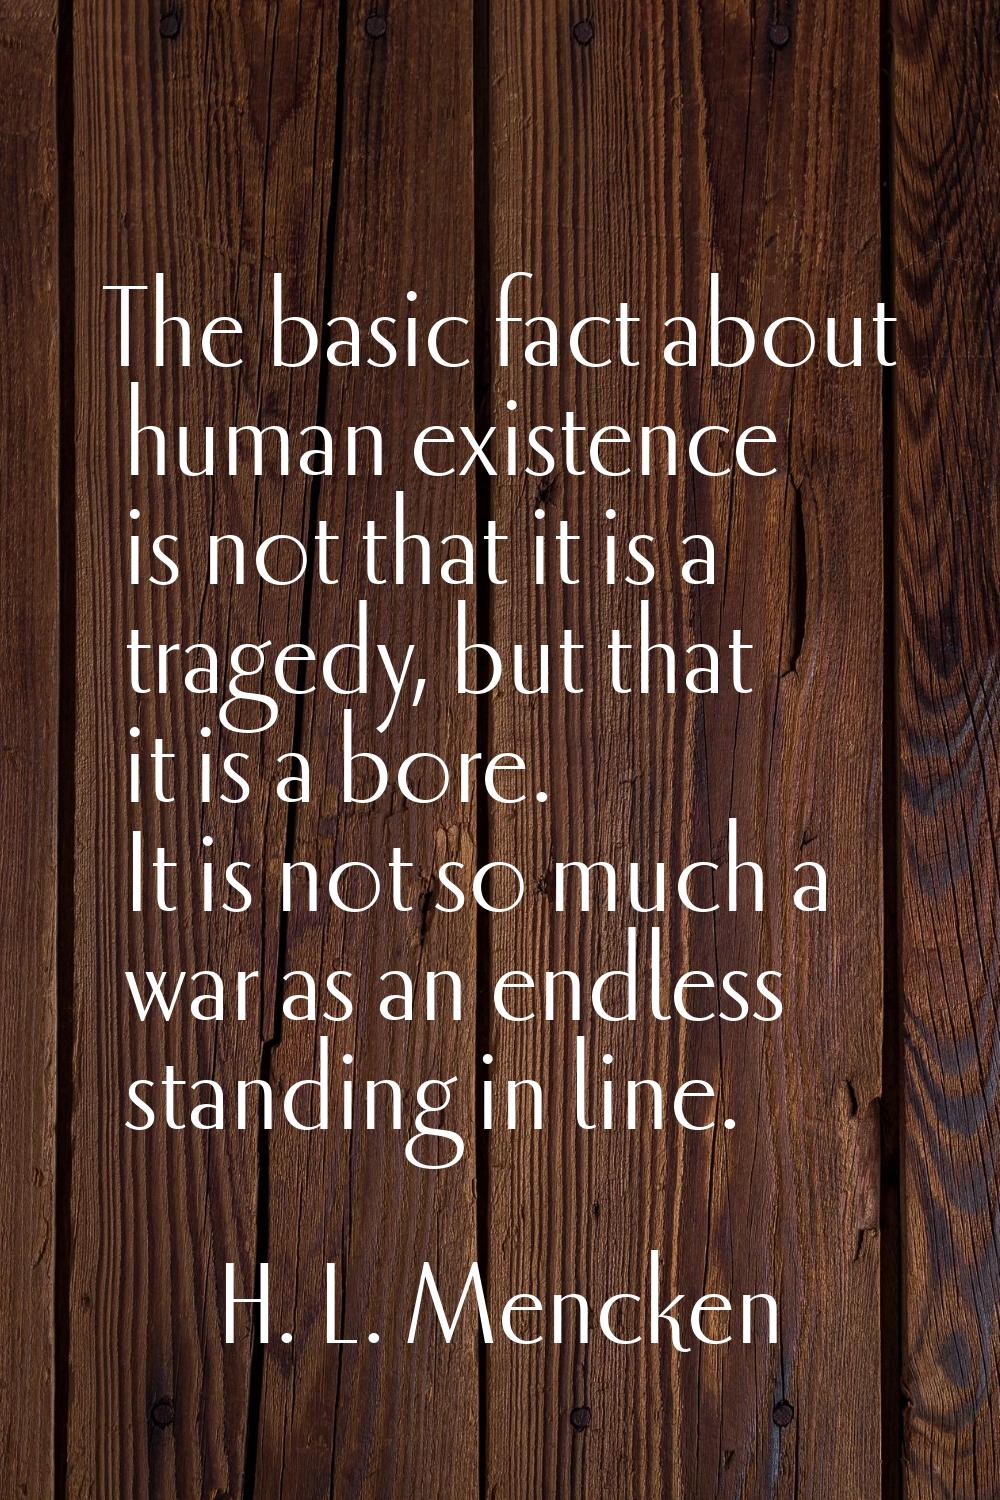 The basic fact about human existence is not that it is a tragedy, but that it is a bore. It is not 